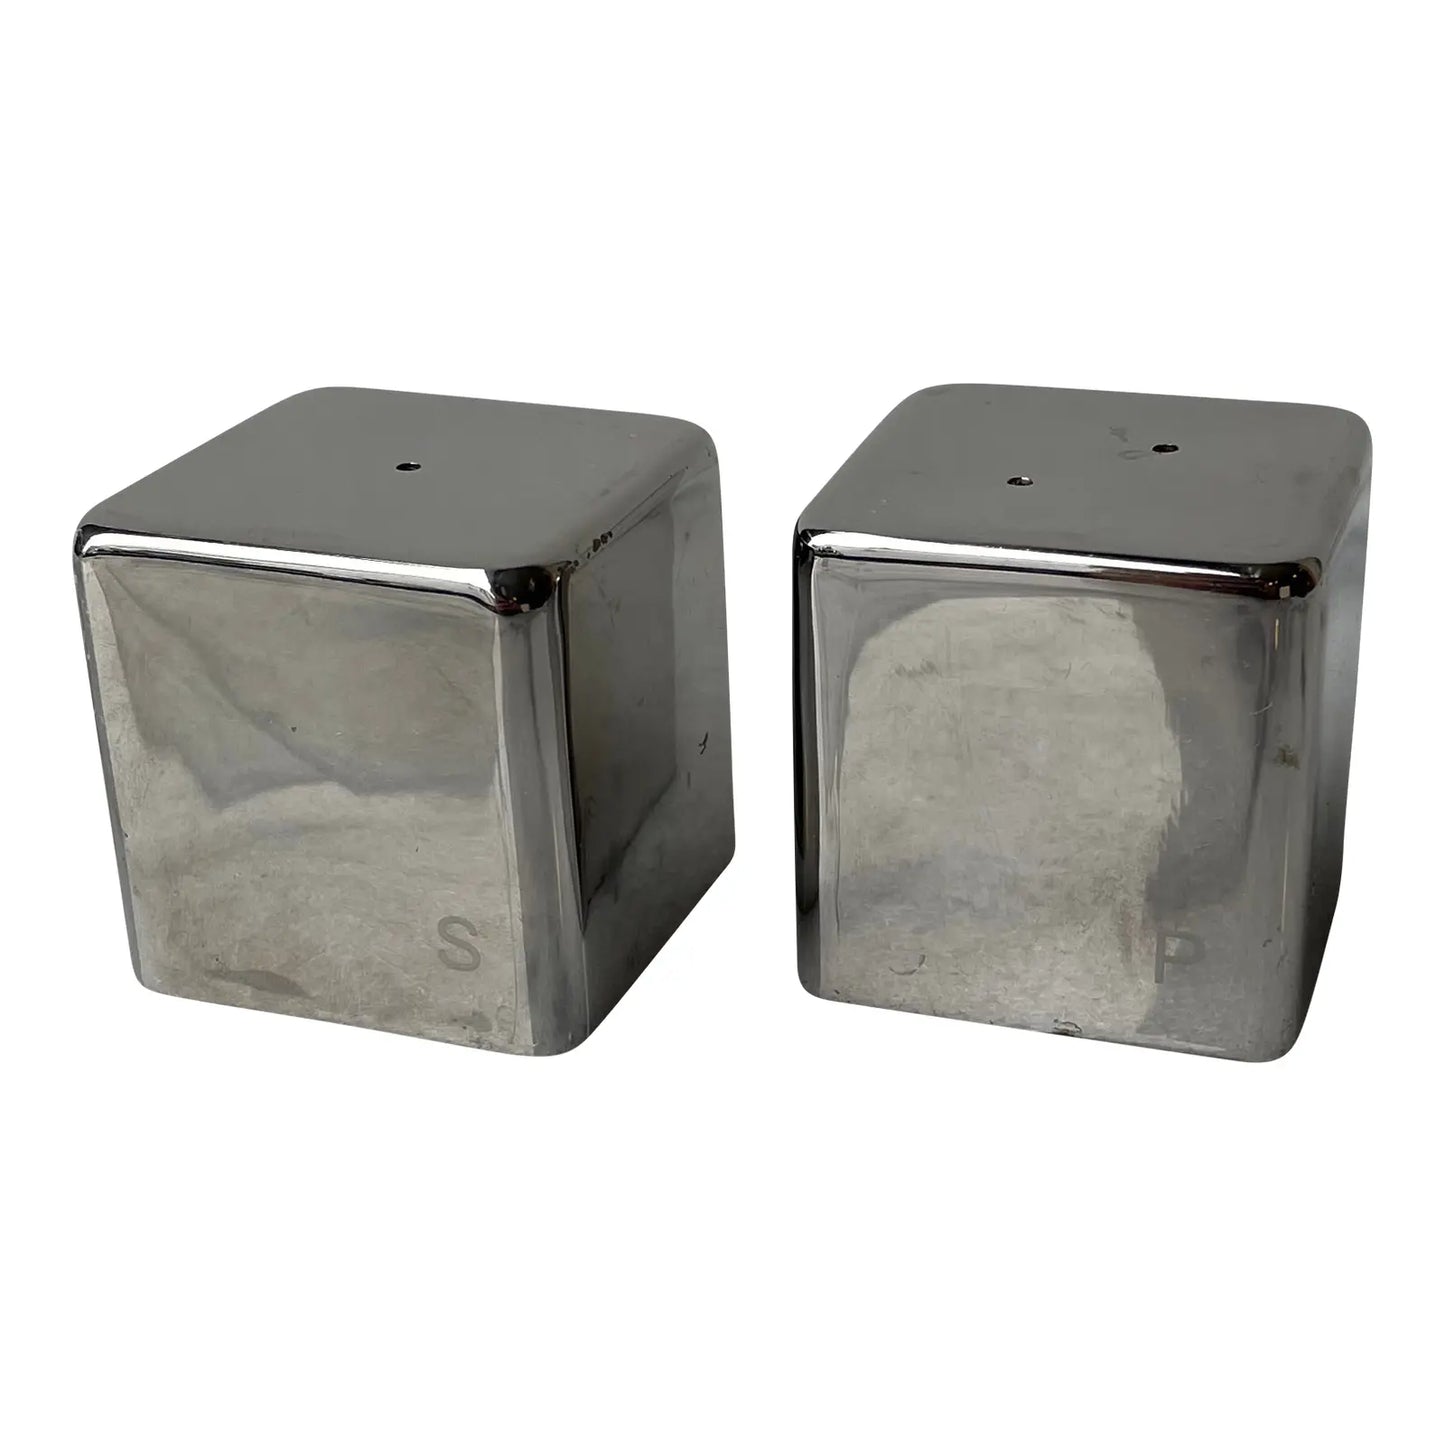 Vintage Modern Mirrored Cube Salt and Pepper Shakers